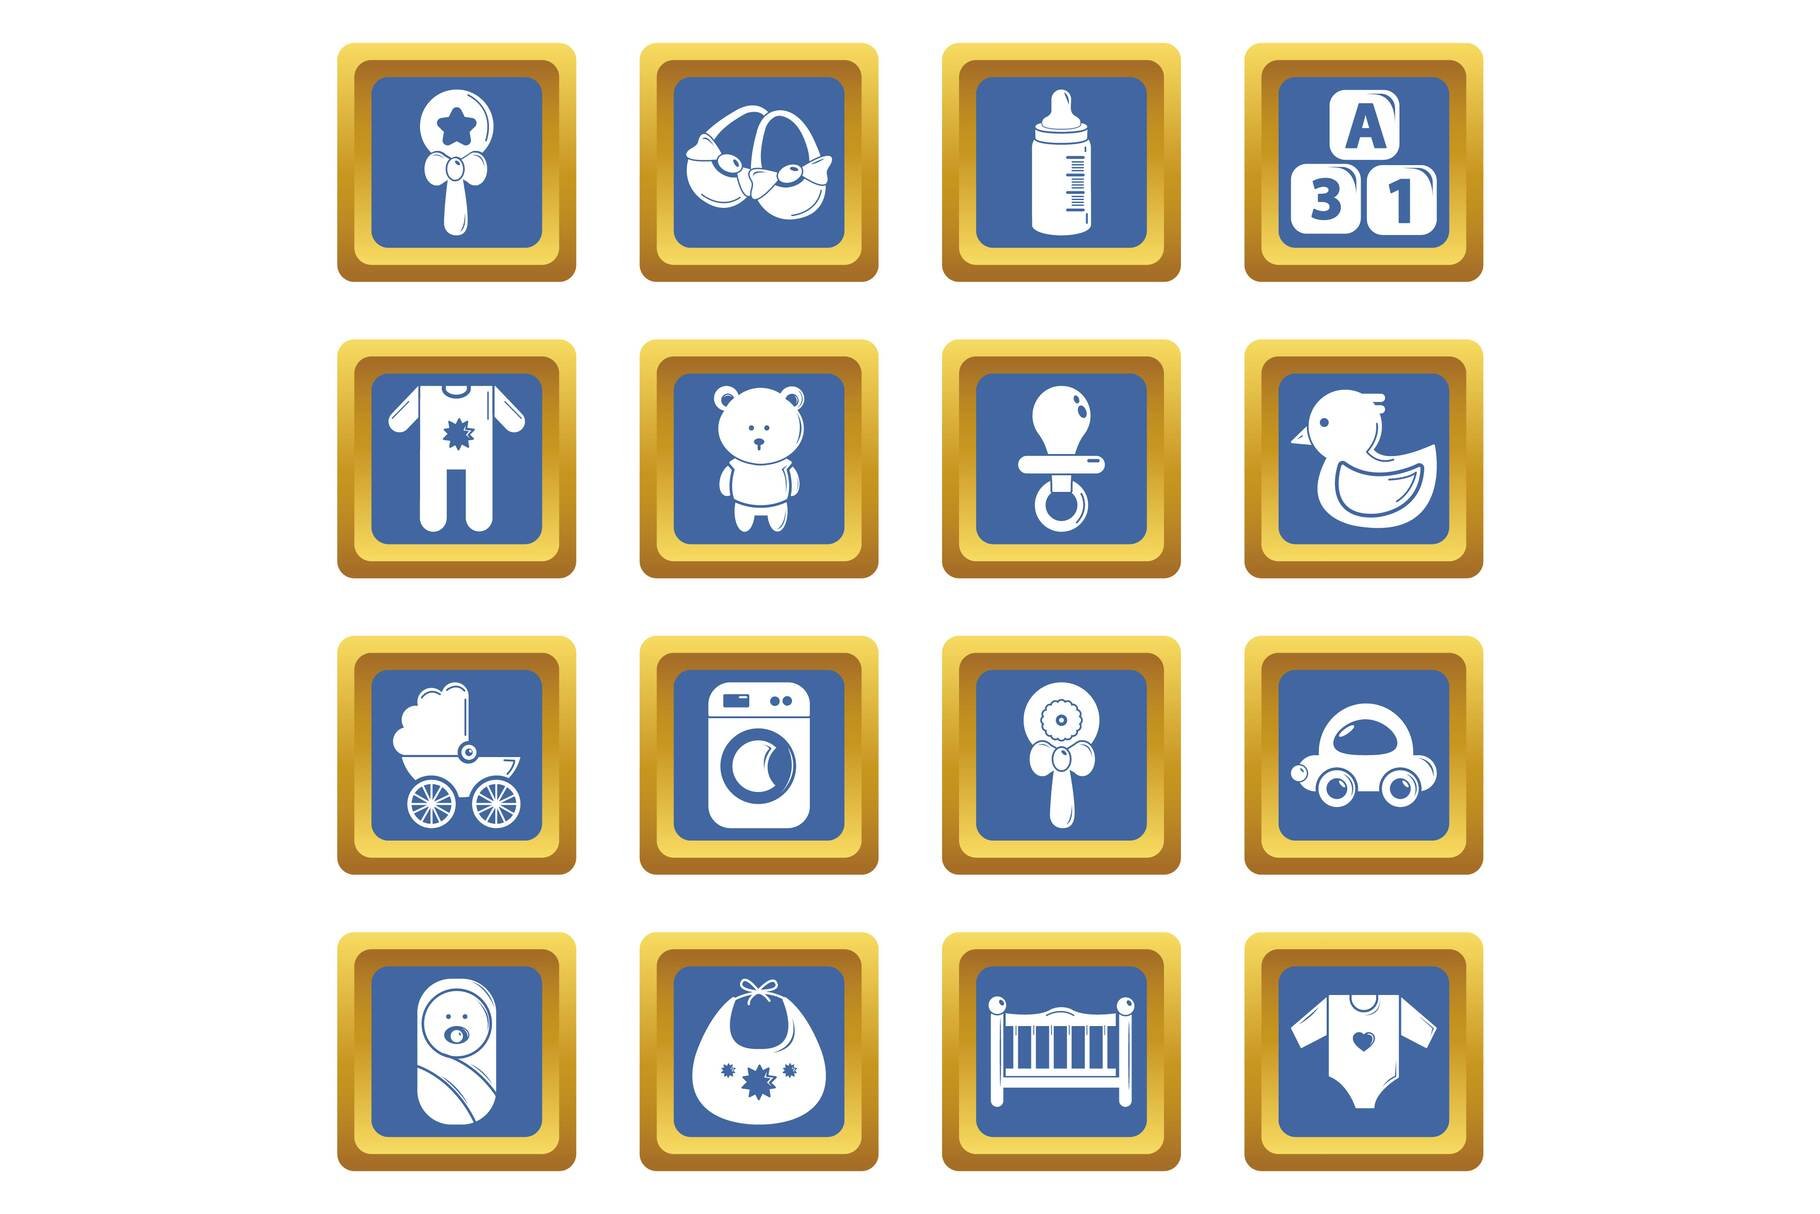 Baby born icons set blue square cover image.